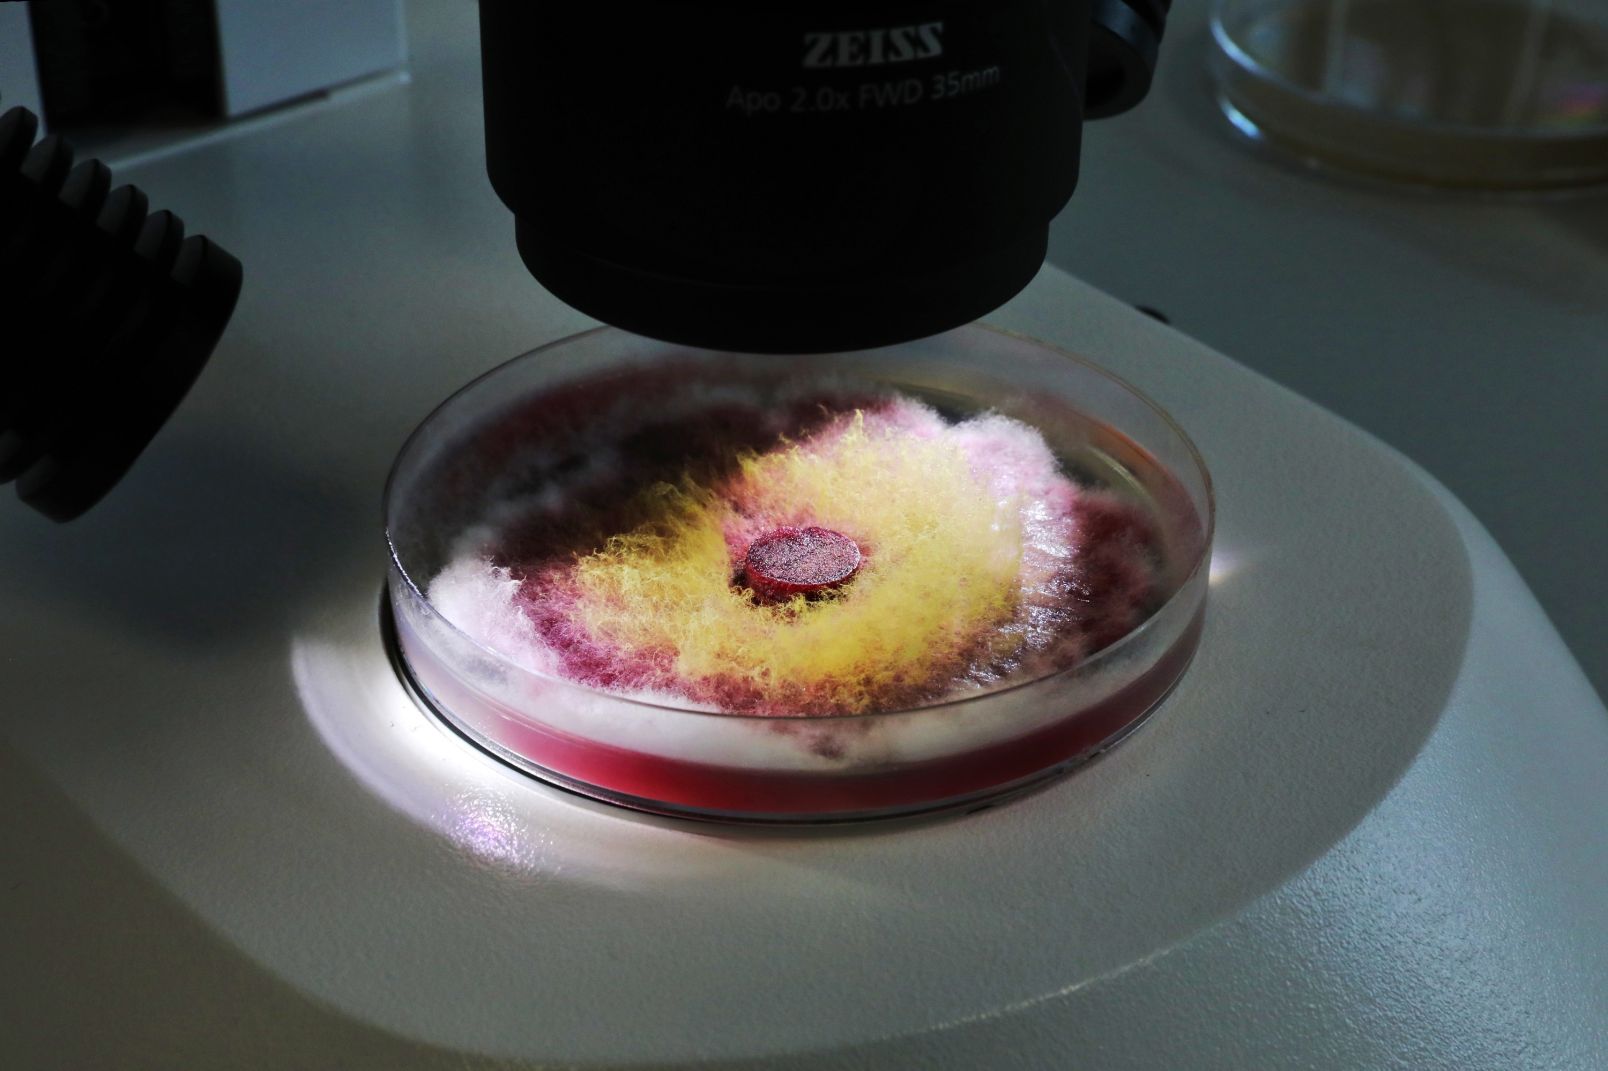 Fusarium culmorum strain on a medium in a Petri dish used in the biological synthesis of metal nanoparticles